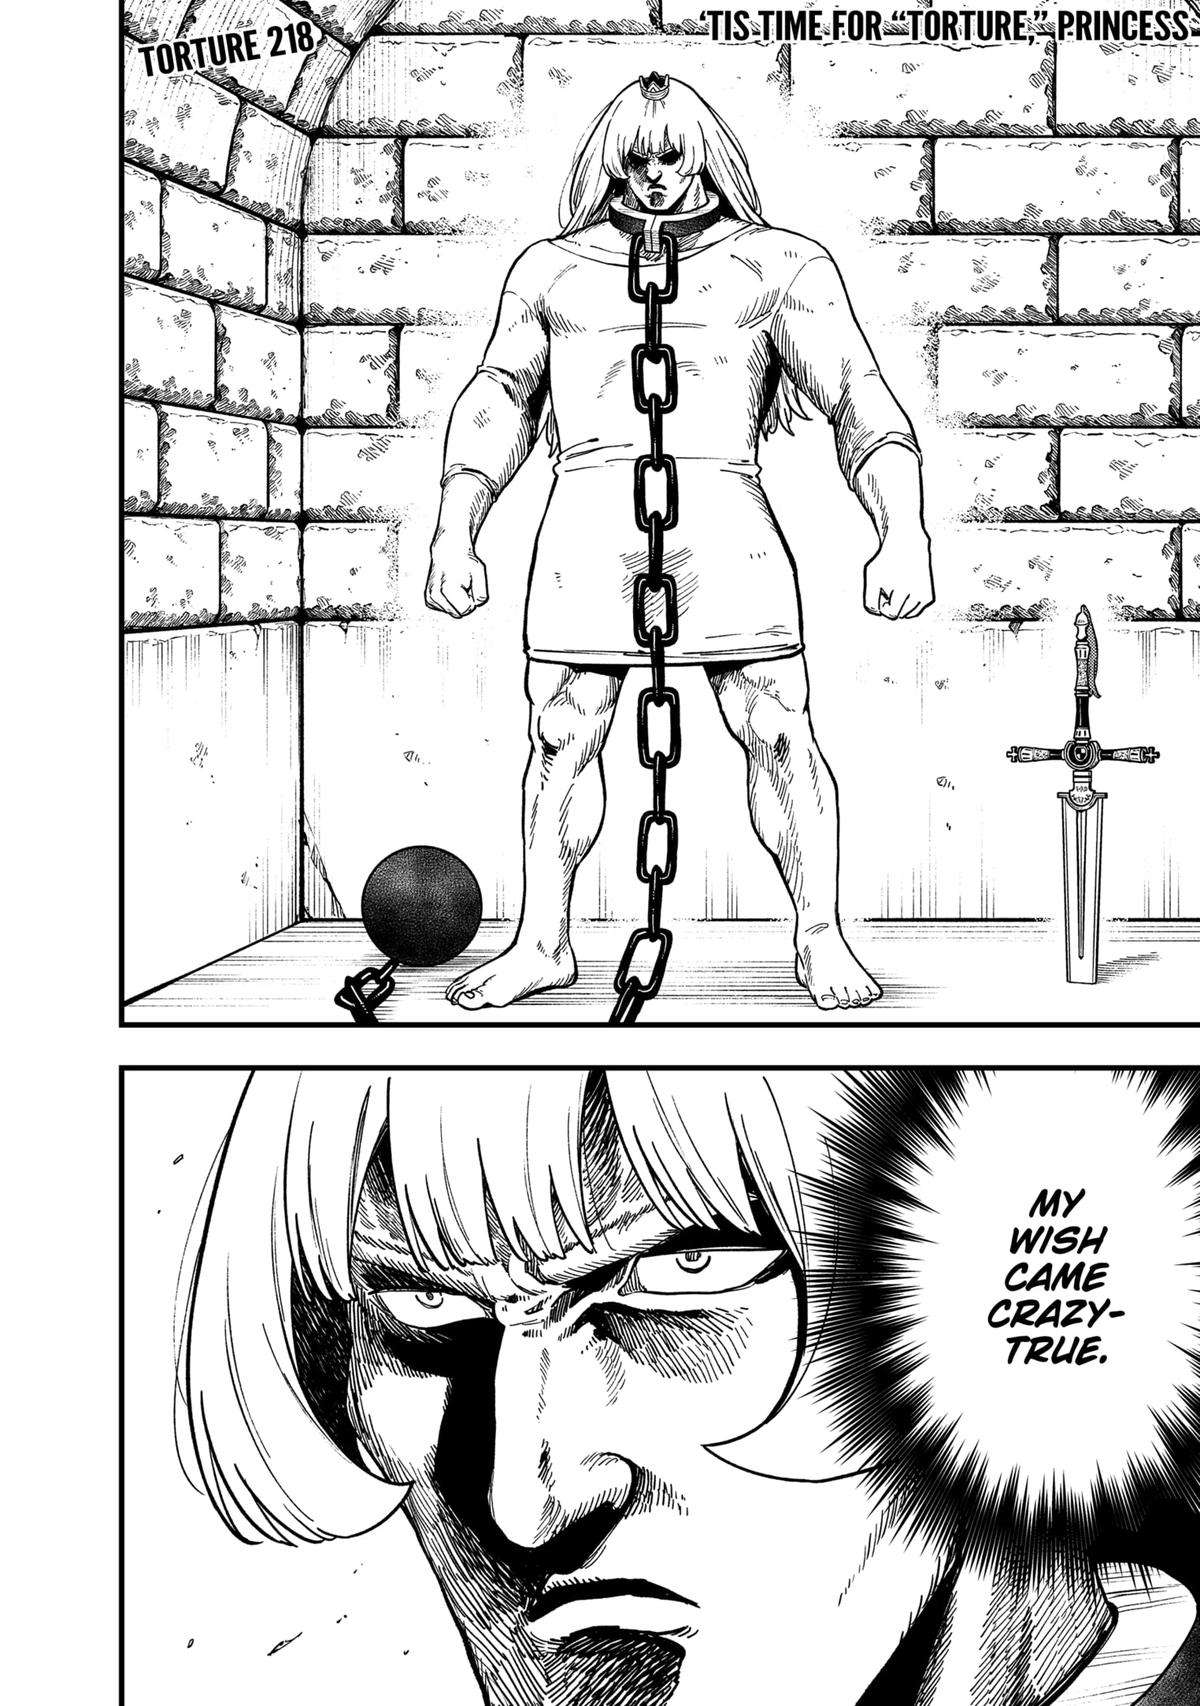 It's Time for "Interrogation", Princess! - chapter 218 - #2